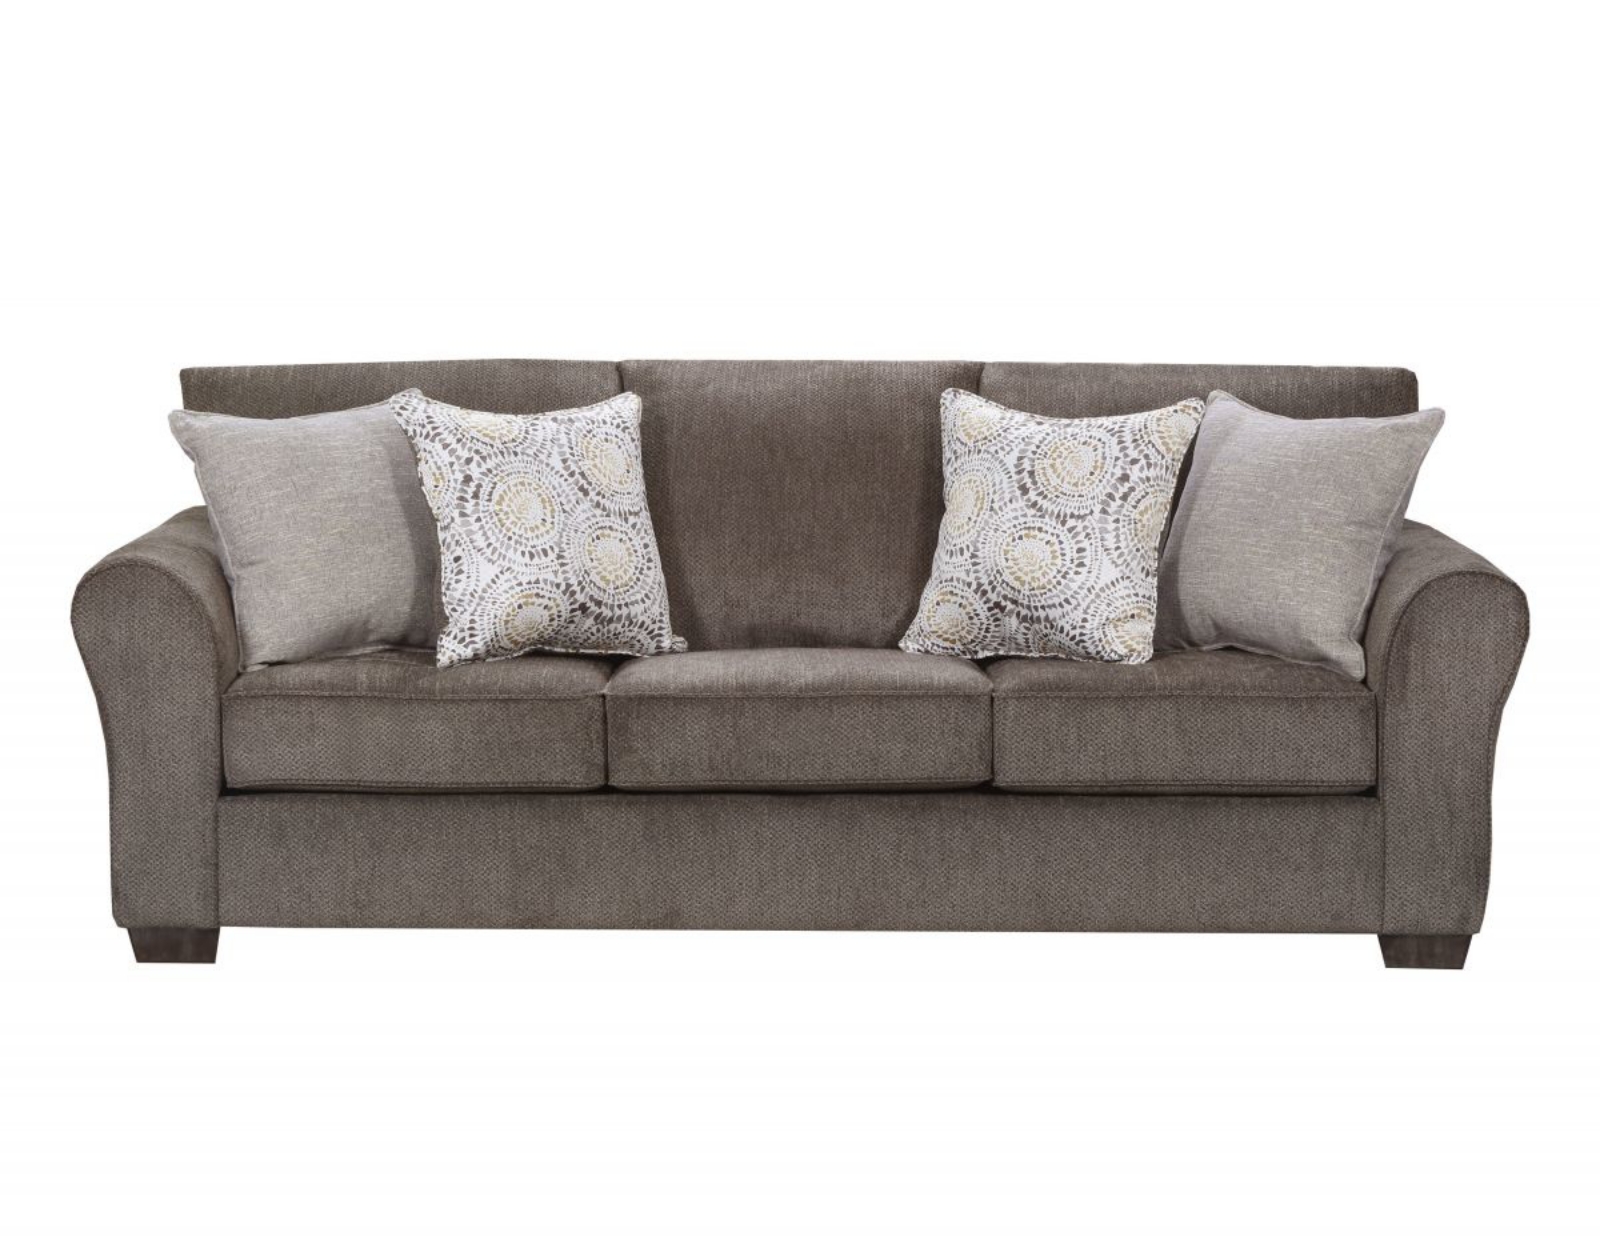 Picture of Harlow Sofa